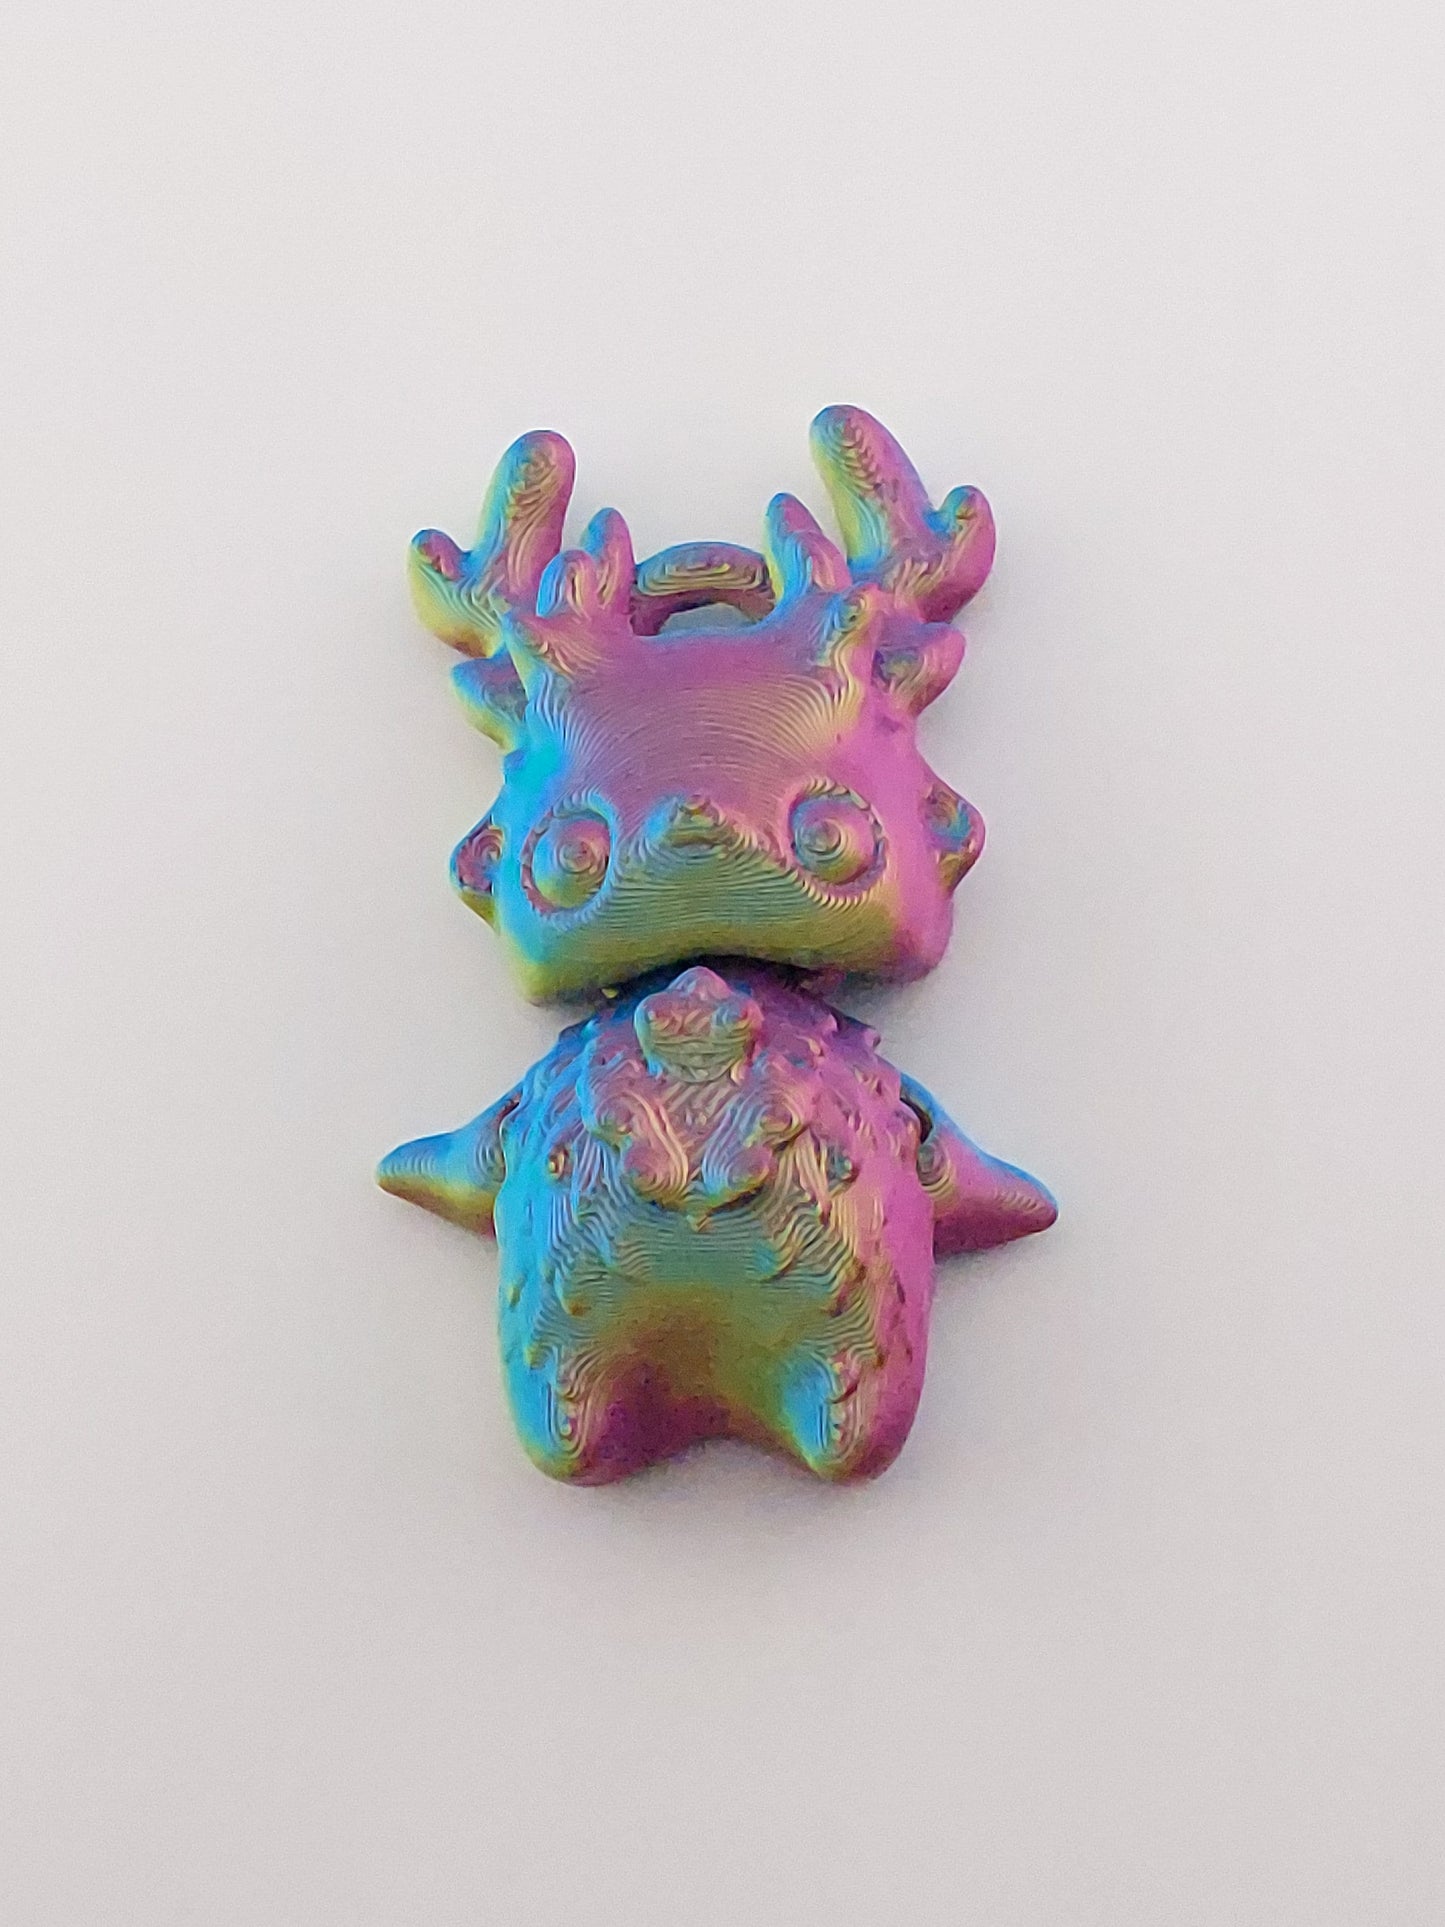 1 Articulated Forest Deer Pixie -- Keychain Decor Gift - 3D Printed Fidget Fantasy Creature - Customizable Colors - Authorized Seller